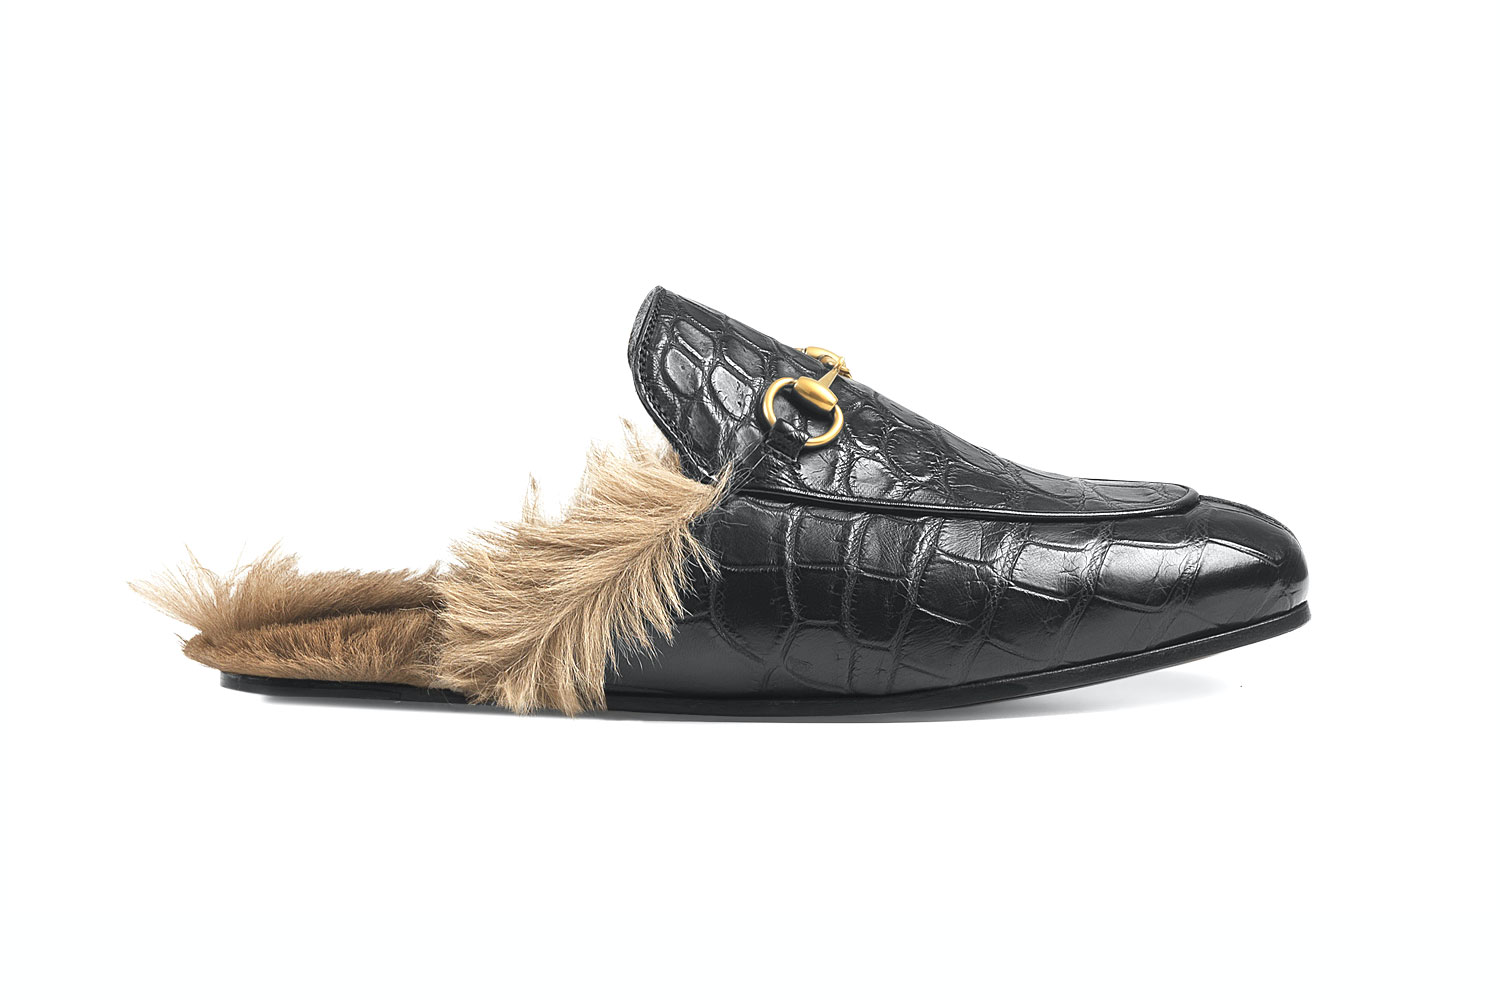 World's Most Expensive Shoes for Businessmen - CEOWORLD magazine